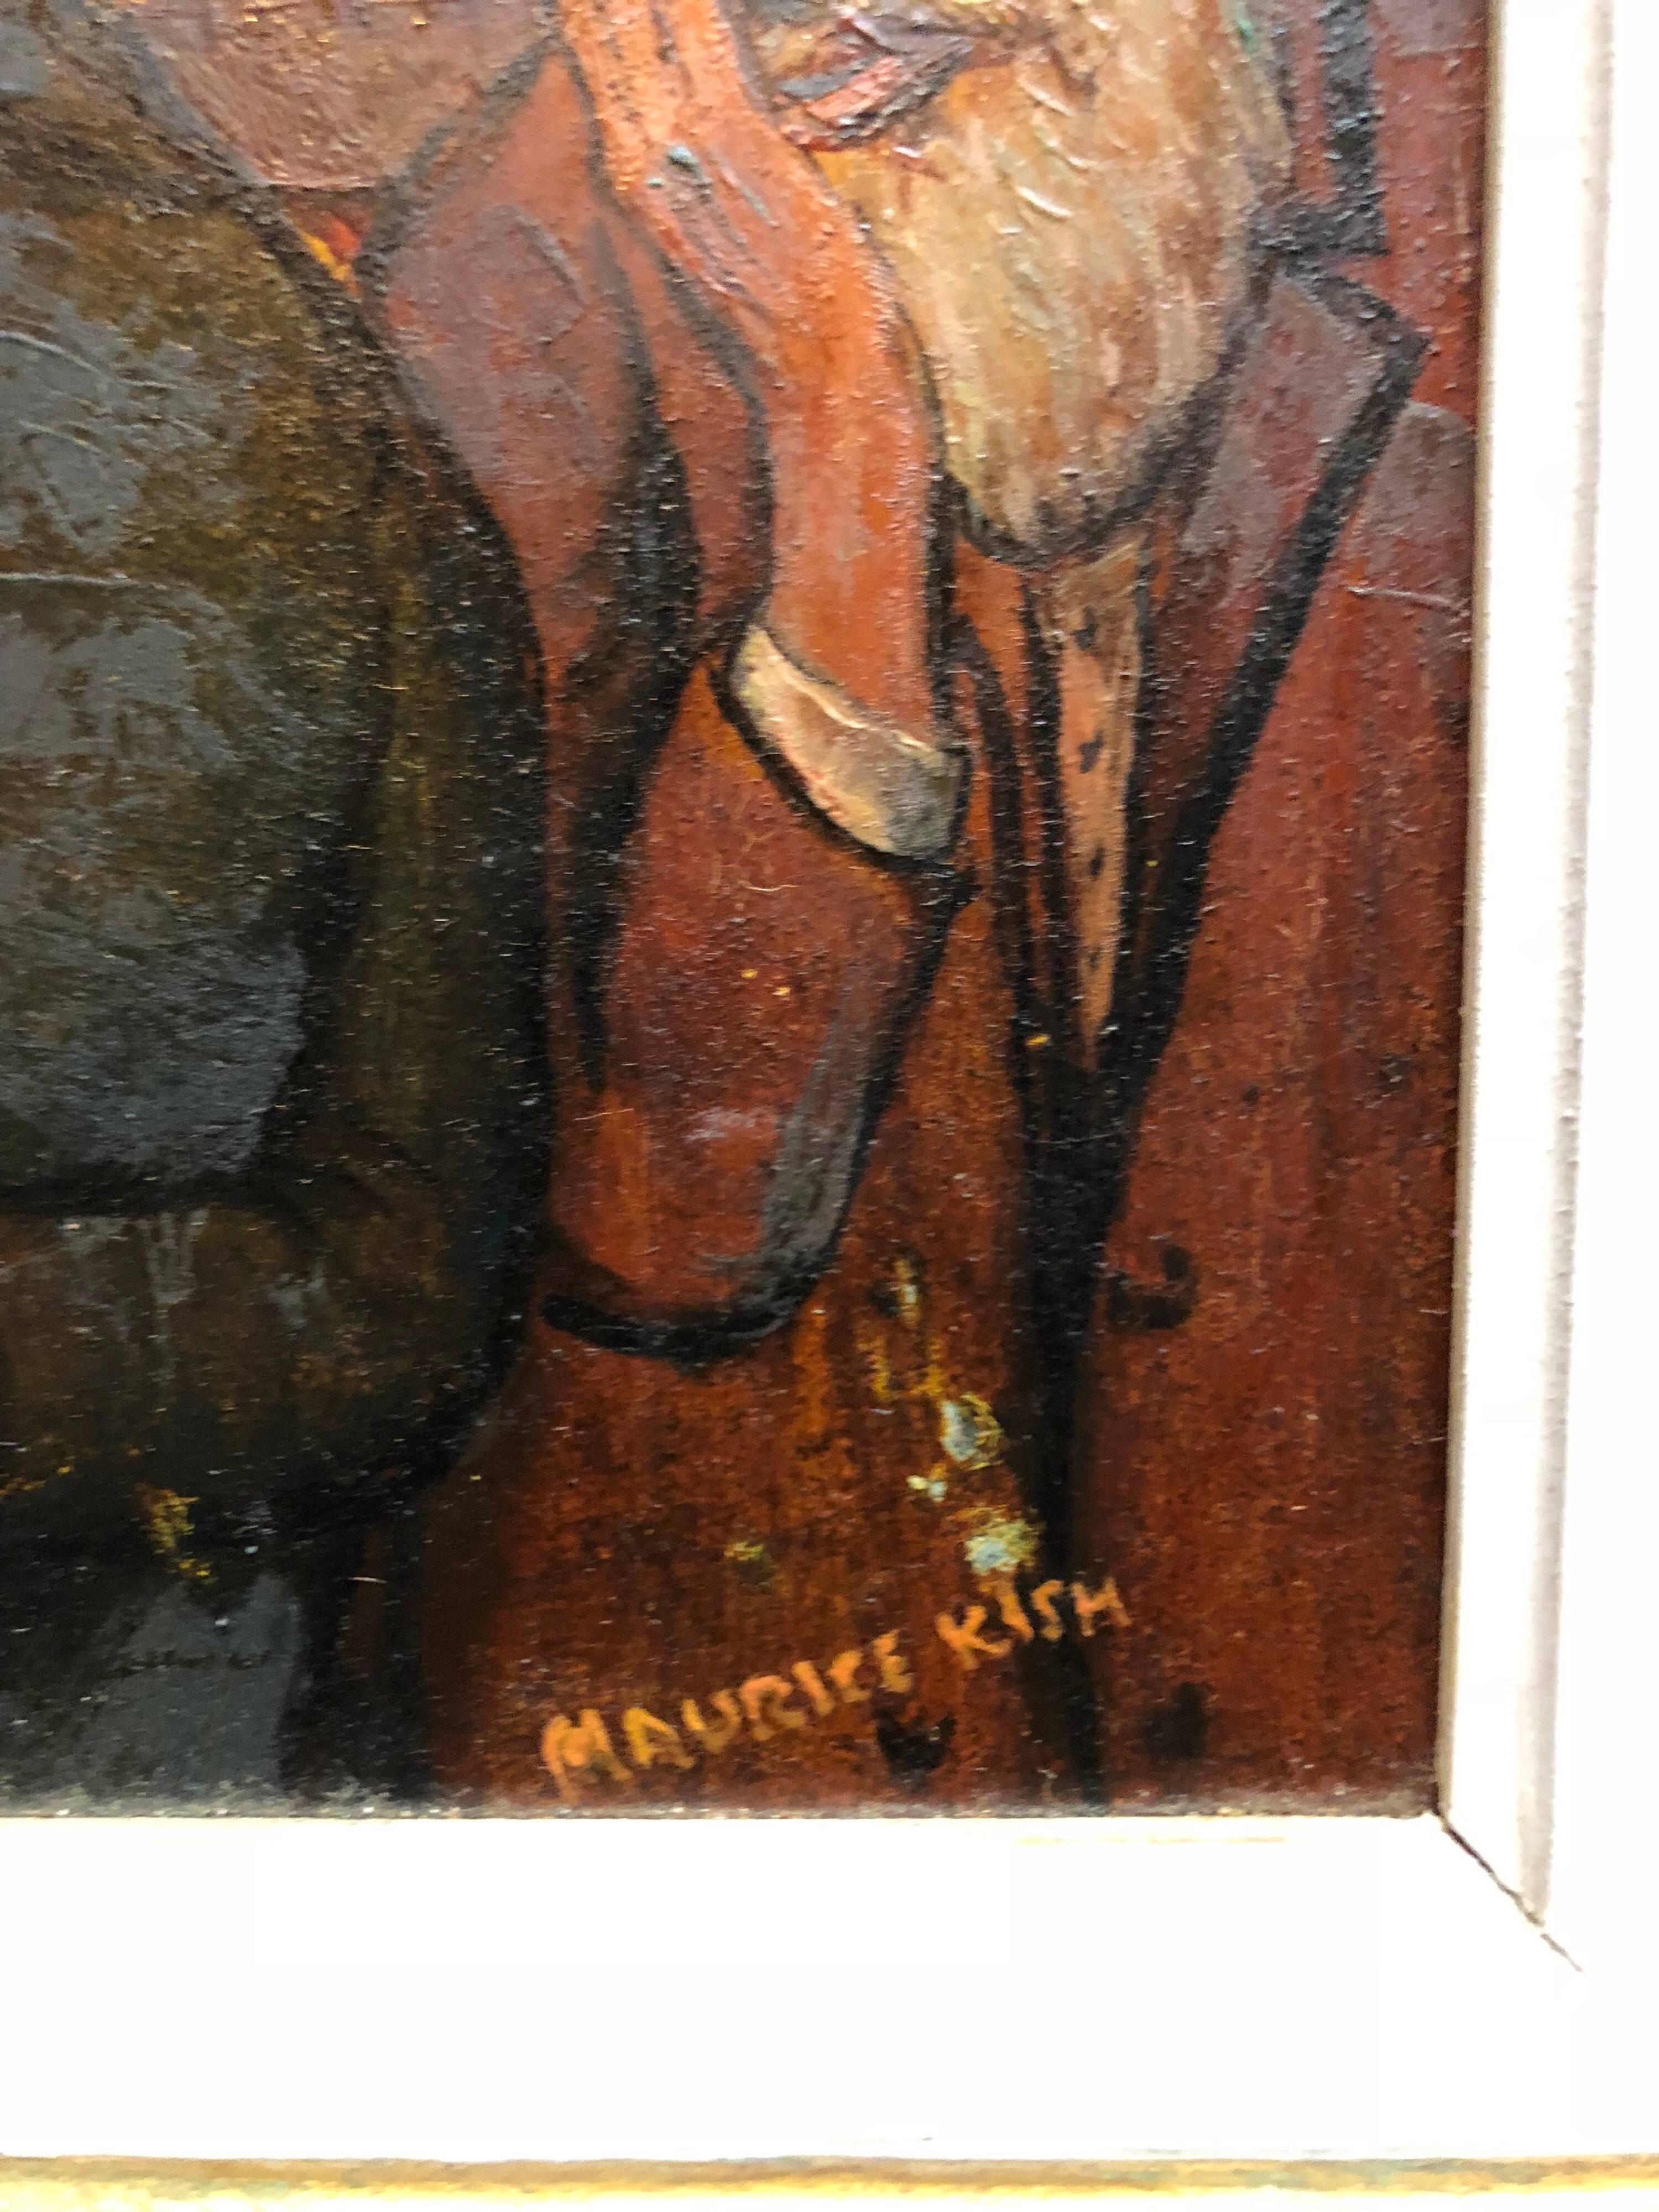 Genre: Modern
Subject: Hasidic Rabbi preaching in Synagogue
Medium: Oil
Surface: Board, size includes artist decorated frame 
Country: United States

The imagery of Maurice Kish (1895-1987), whether factories or carousels, reliably subverts